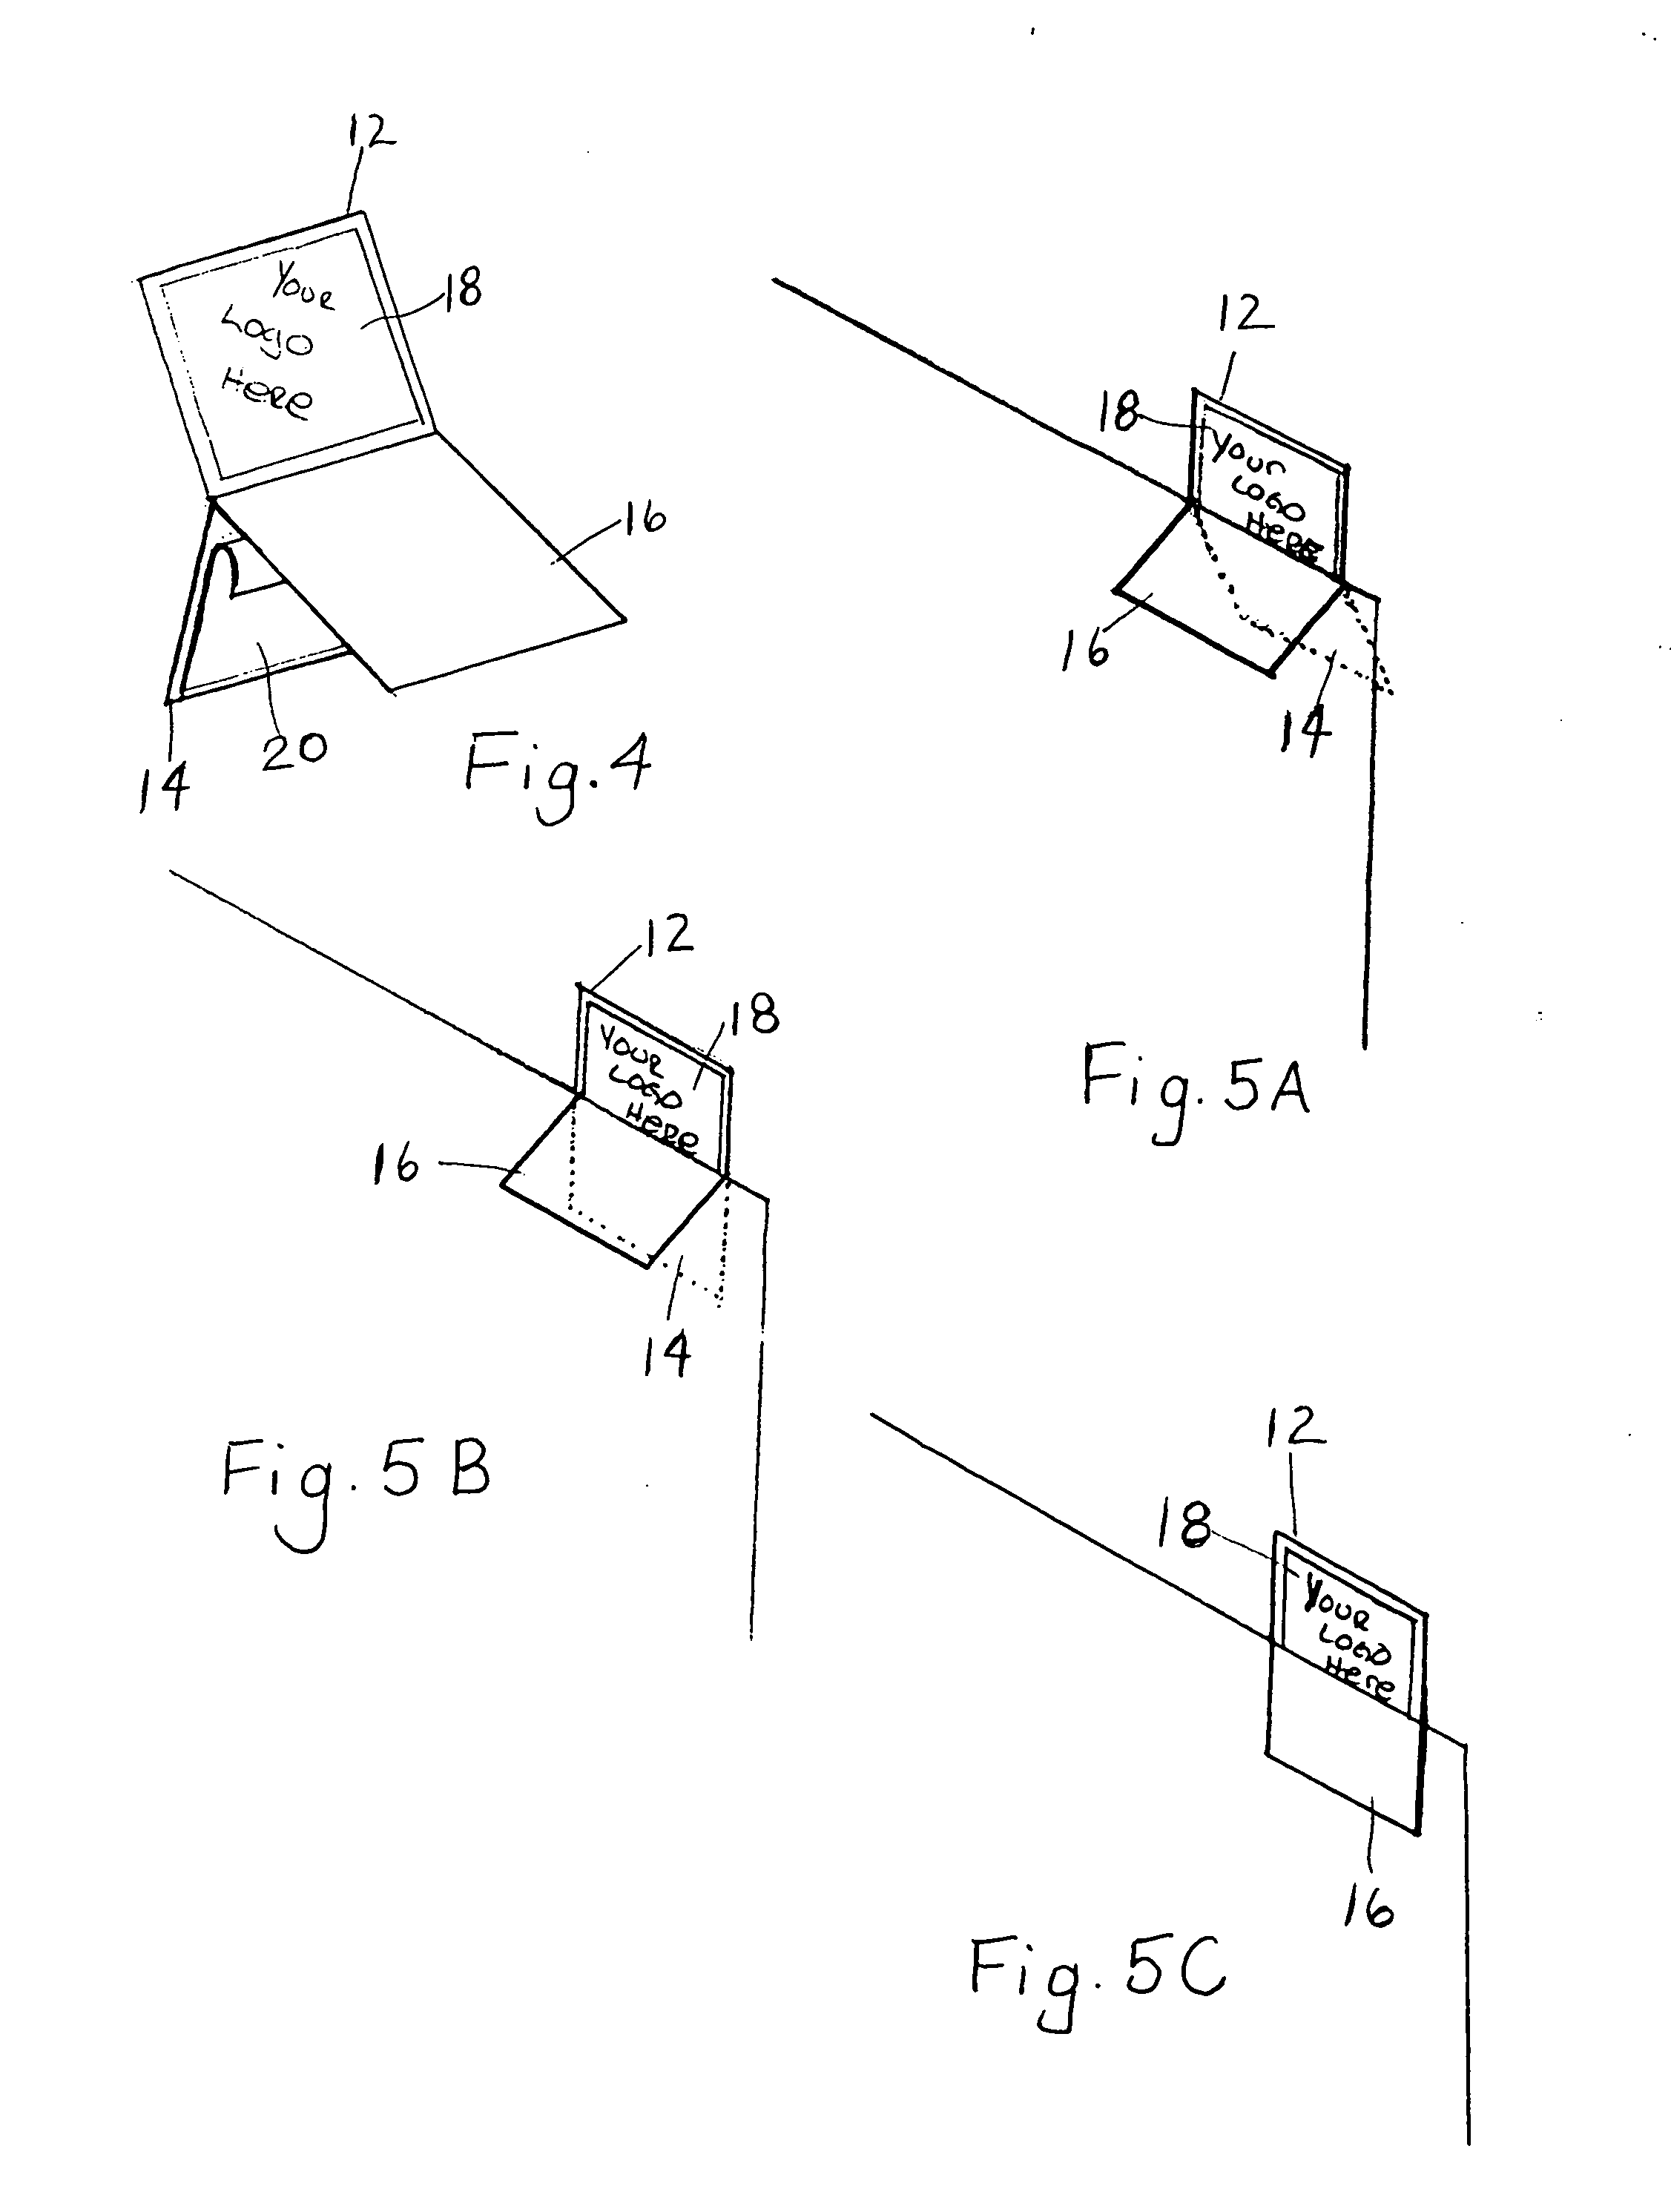 Adhesive retrieval tab for removal of credit card style item